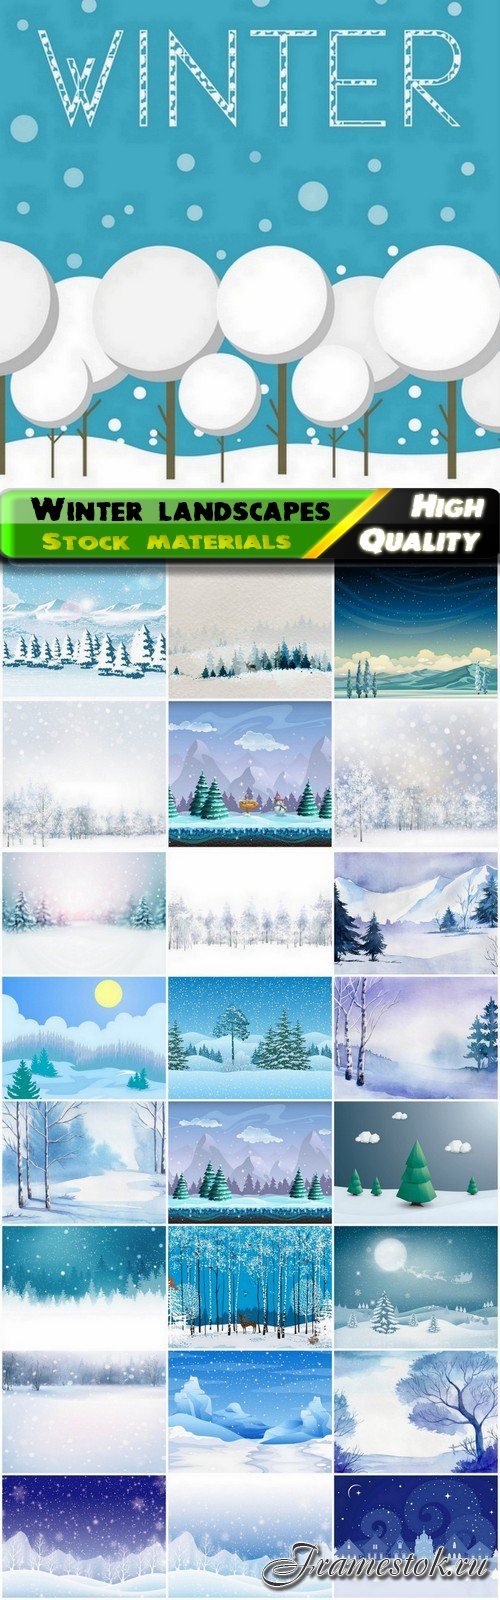 Winter nature landscapes with snow fir-tree forest - 25 Eps